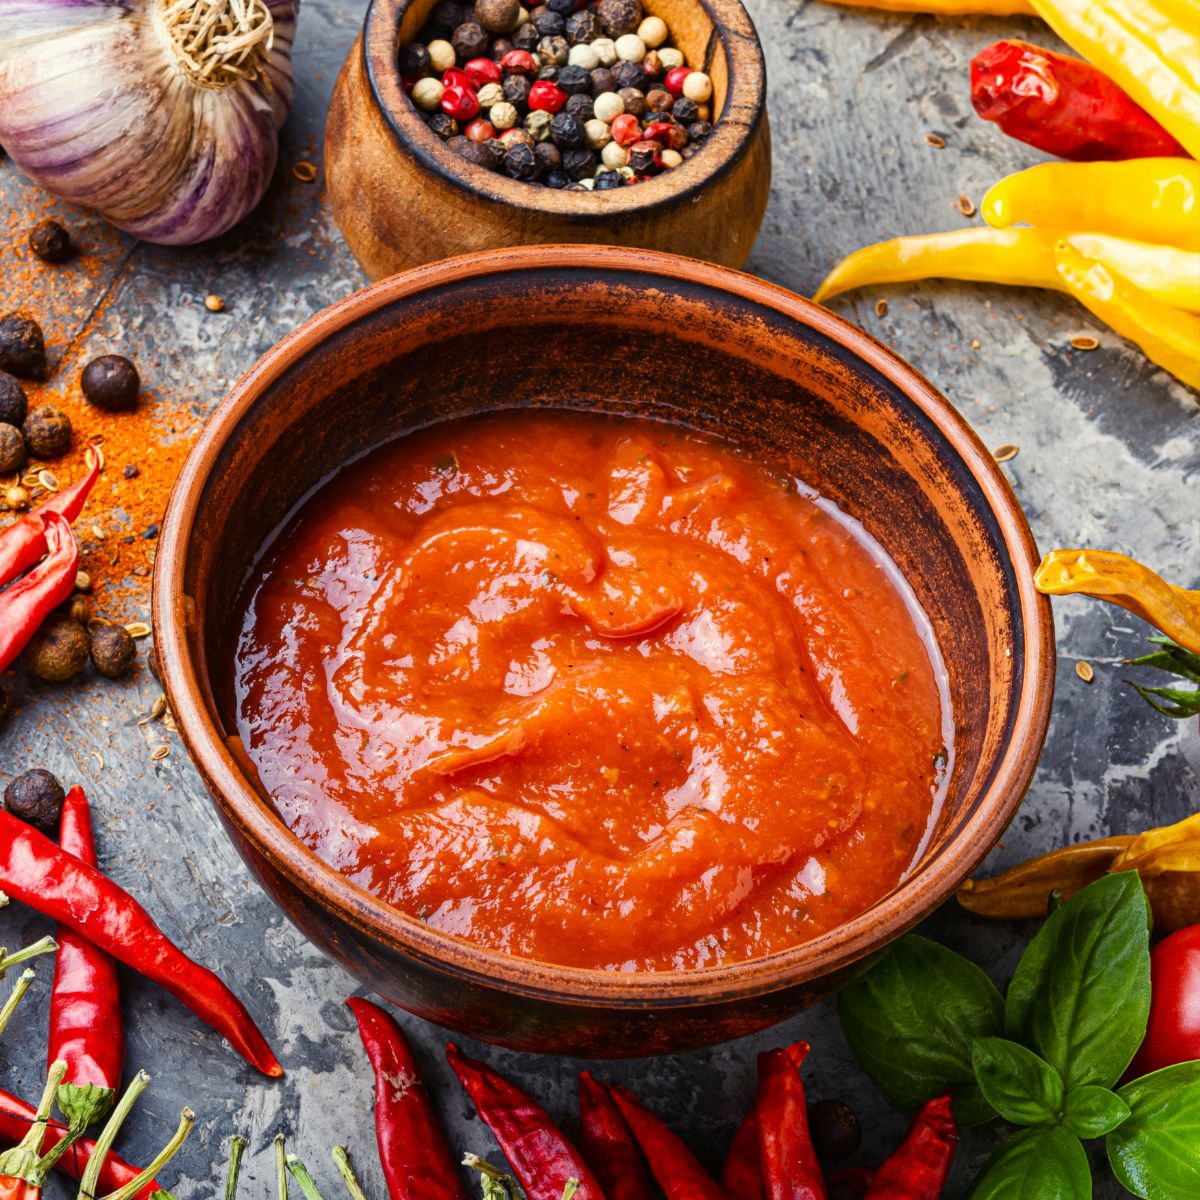 Red enchilada sauce in a bowl surrounded by chillies, garlic and peppers on the table